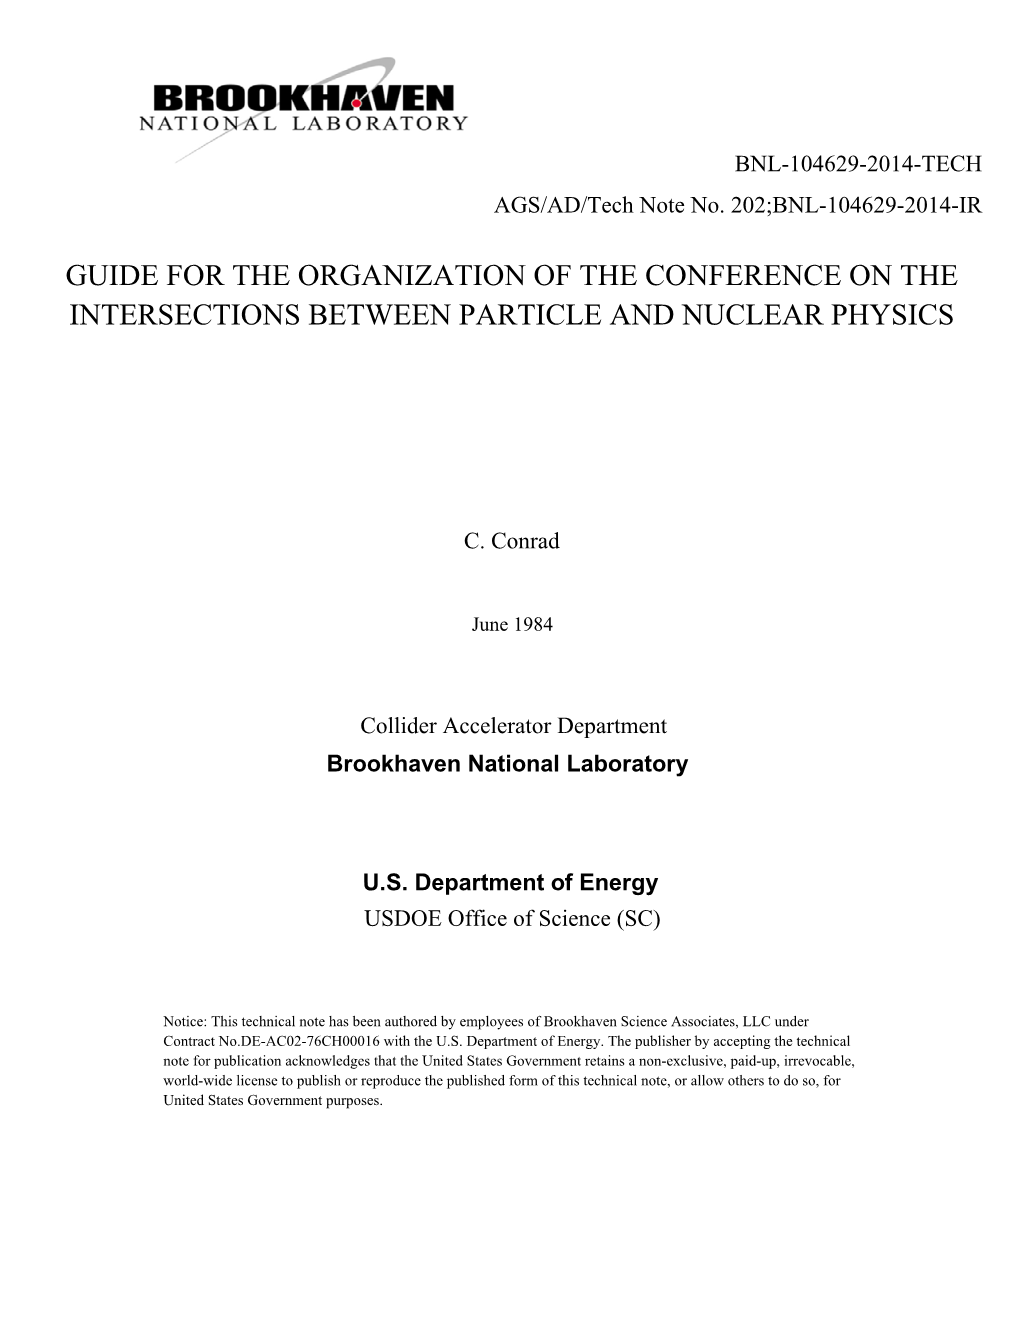 Guide for the Organization of the Conference on the Intersections Between Particle and Nuclear Physics